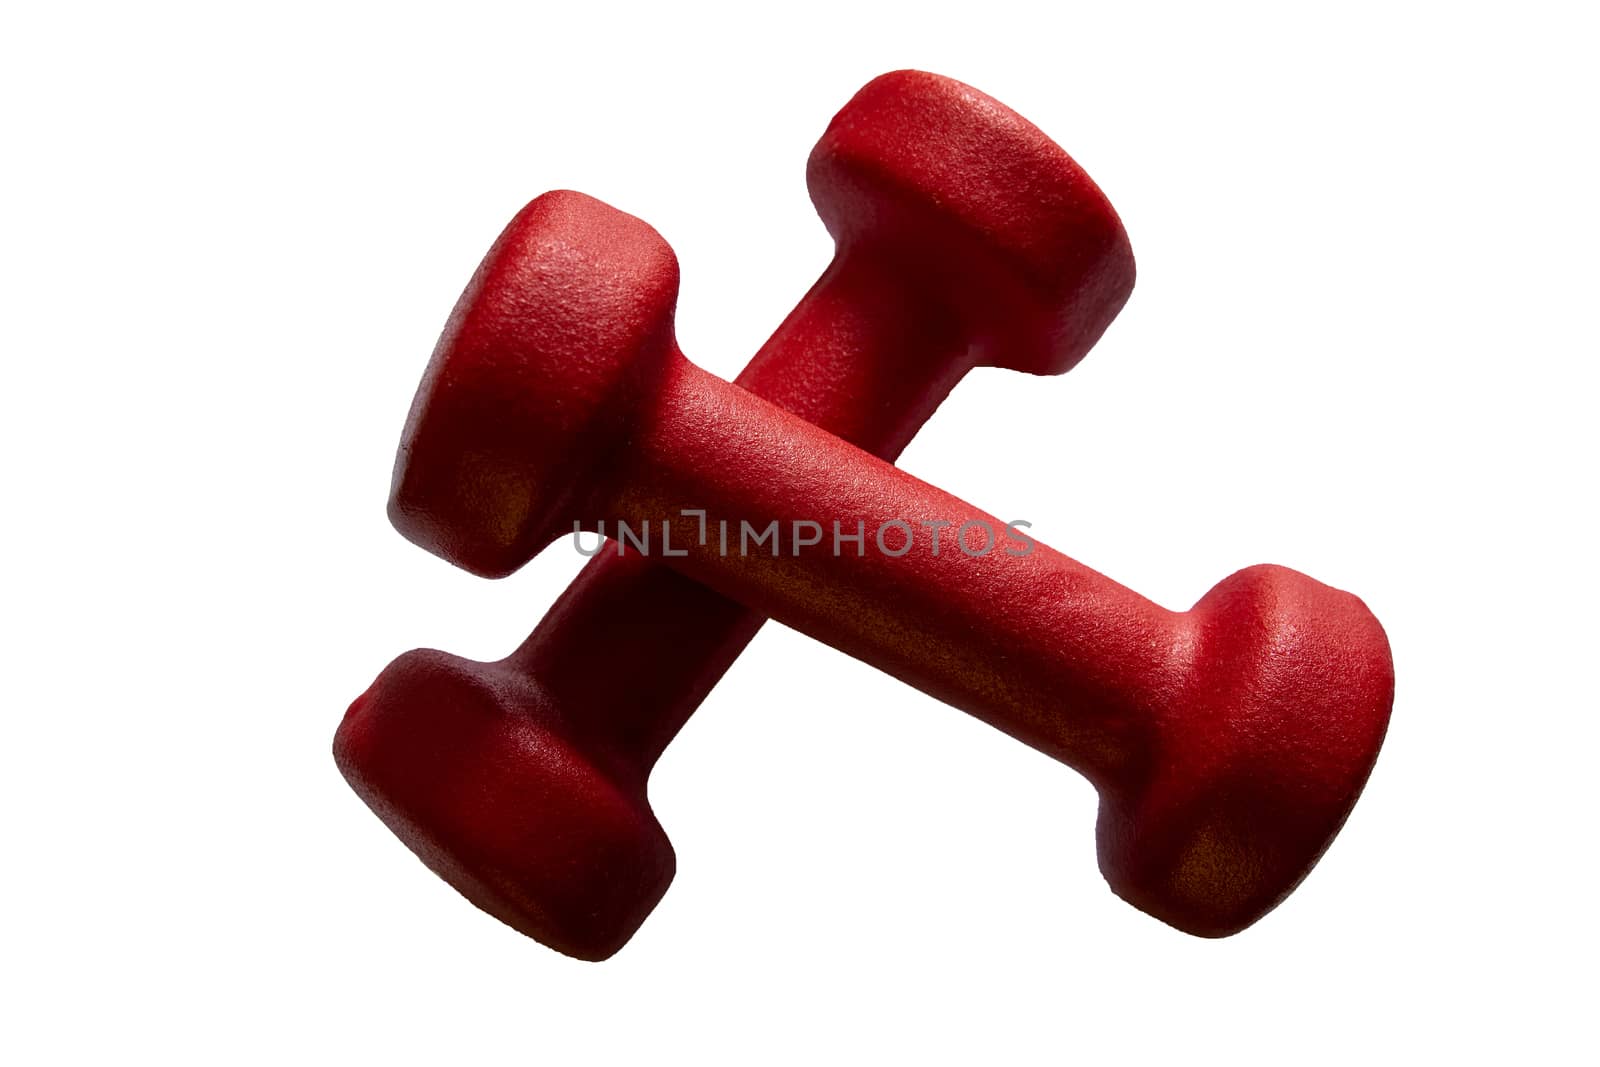 Two red rubber or plastic coated fitness dumbbells isolated on white background. by kip02kas